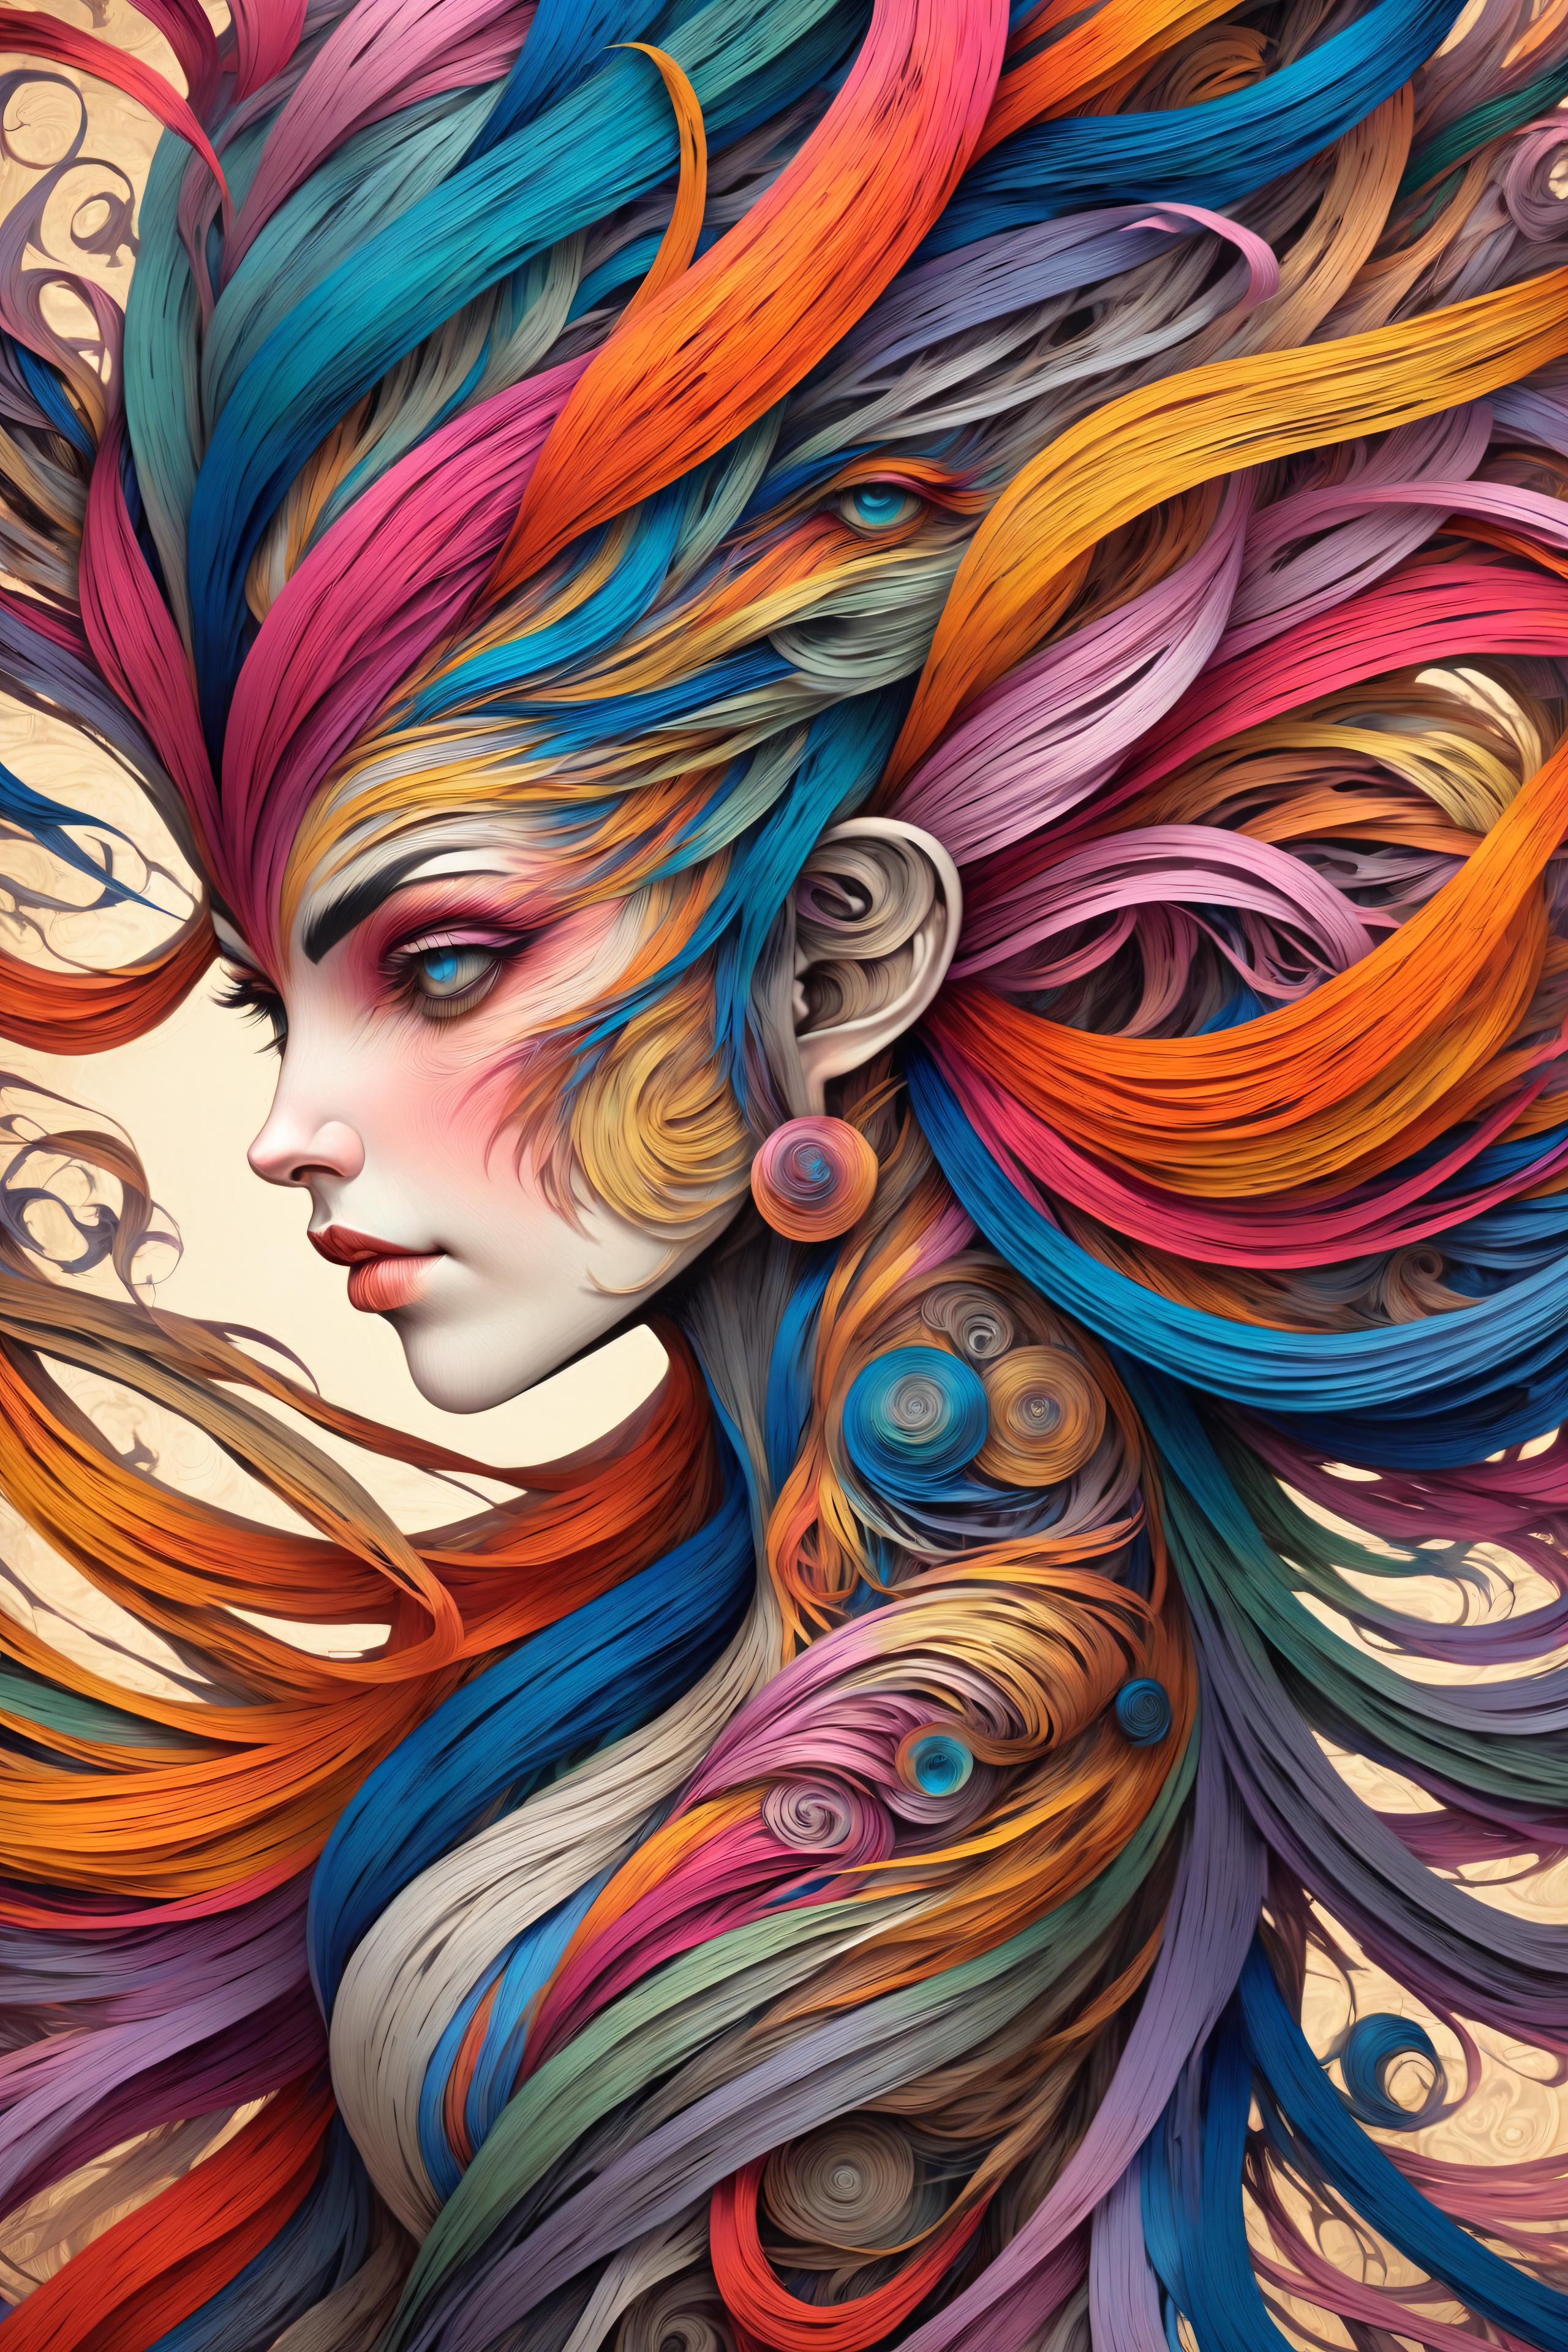 Vibrant and colorful artwork of a woman's face with long hair and unique hair color.